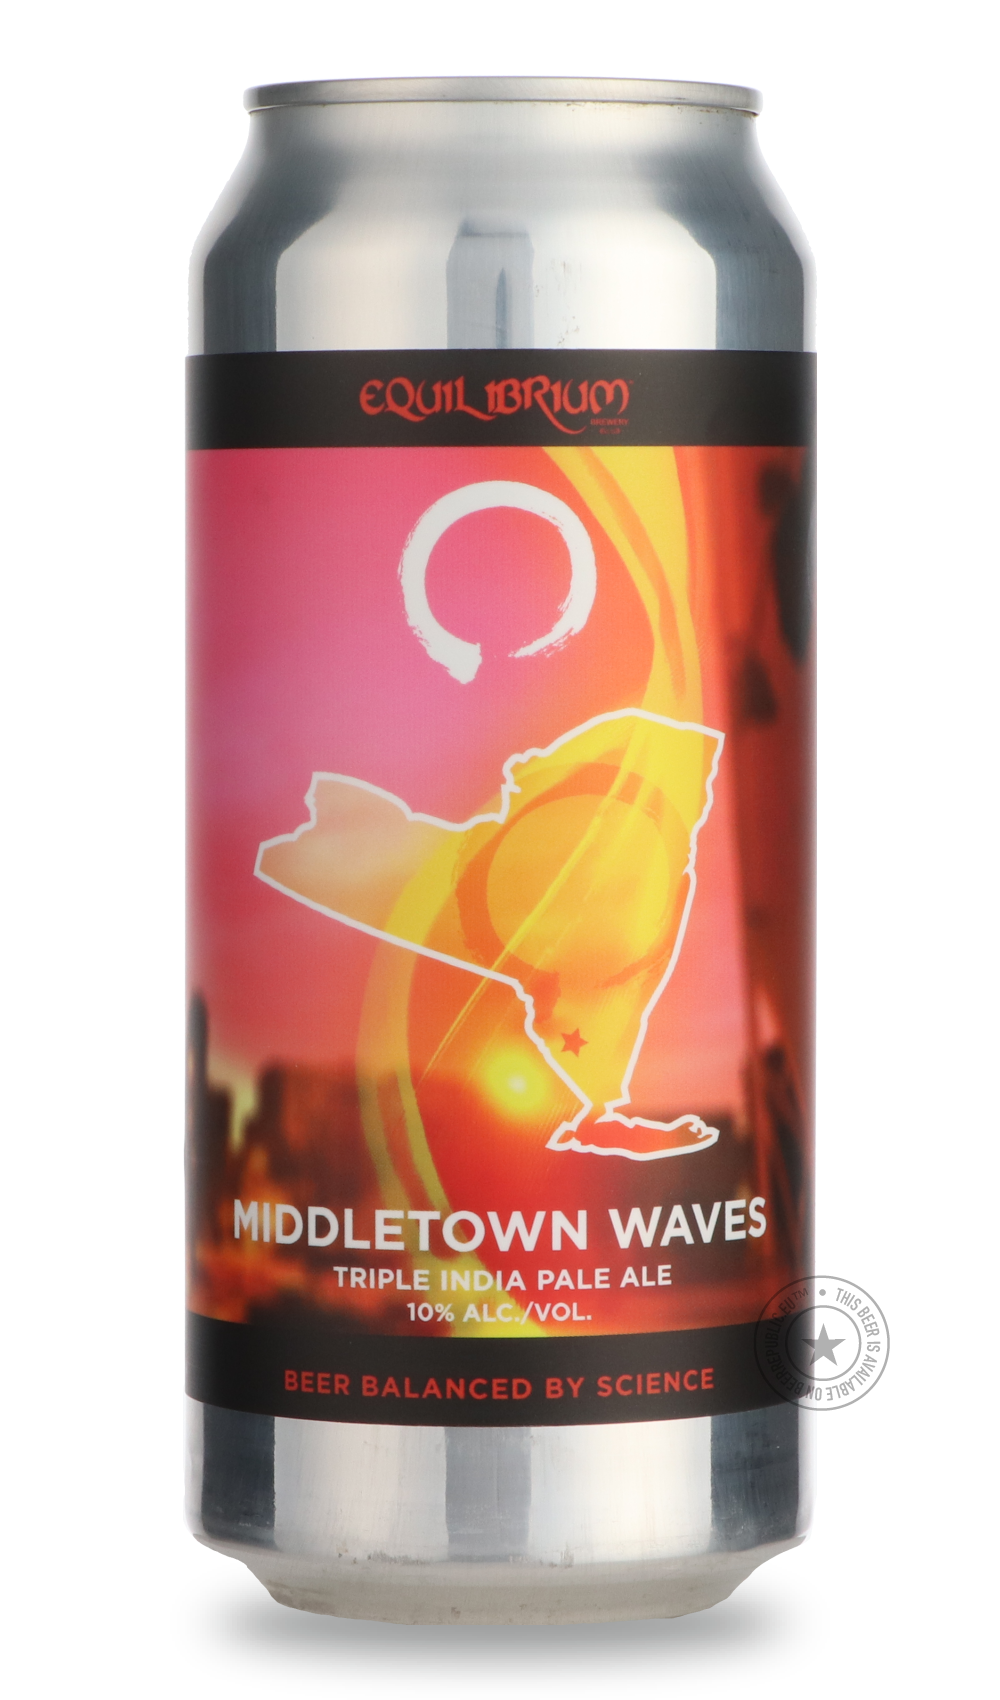 -Equilibrium- Middletown Waves-IPA- Only @ Beer Republic - The best online beer store for American & Canadian craft beer - Buy beer online from the USA and Canada - Bier online kopen - Amerikaans bier kopen - Craft beer store - Craft beer kopen - Amerikanisch bier kaufen - Bier online kaufen - Acheter biere online - IPA - Stout - Porter - New England IPA - Hazy IPA - Imperial Stout - Barrel Aged - Barrel Aged Imperial Stout - Brown - Dark beer - Blond - Blonde - Pilsner - Lager - Wheat - Weizen - Amber - Ba